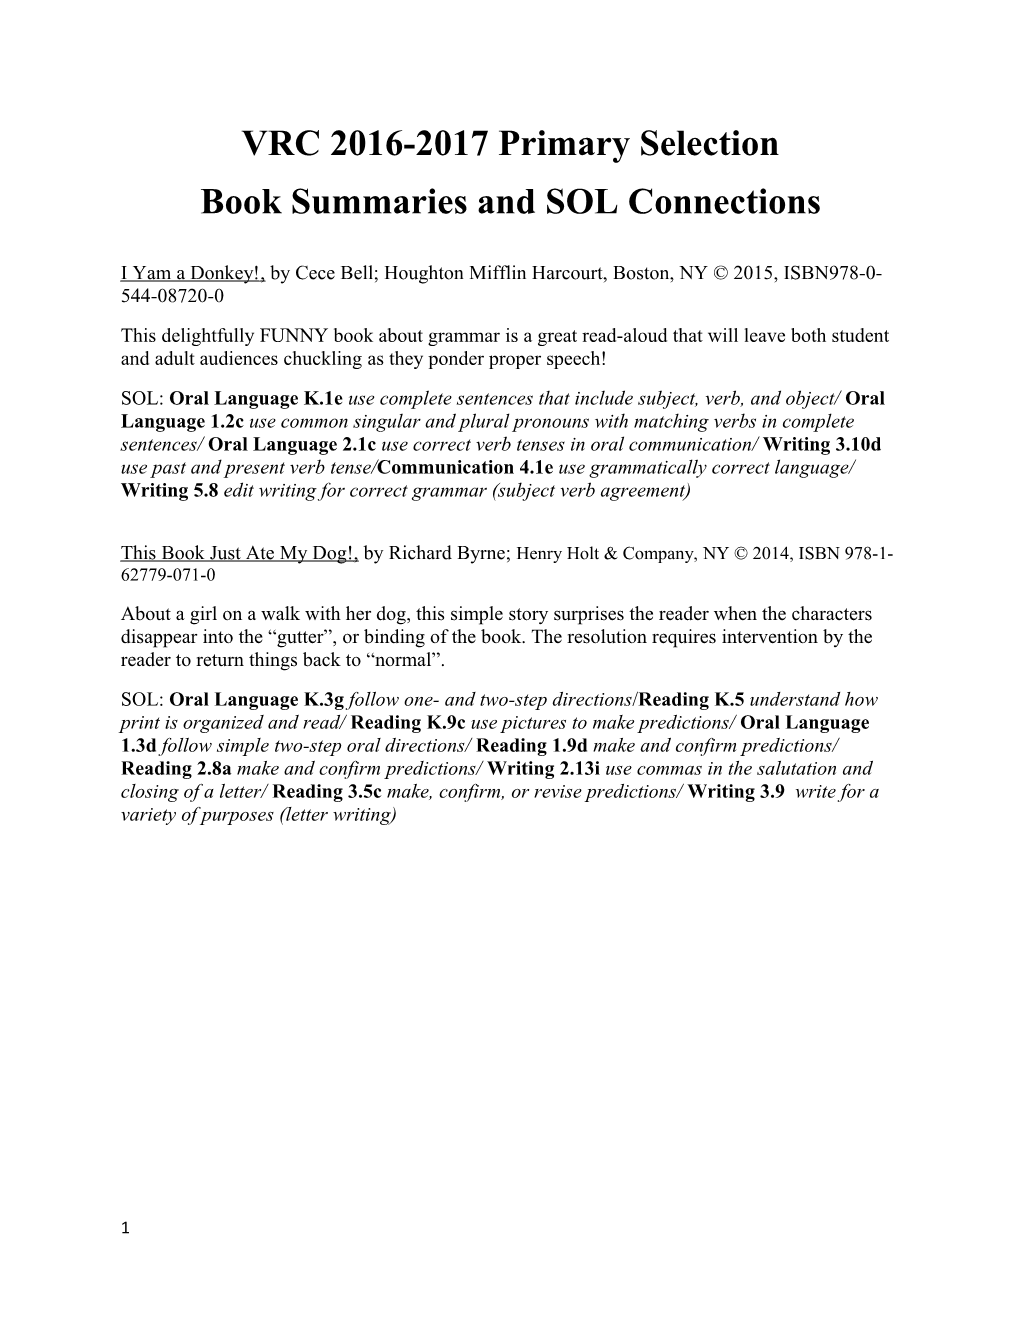 Book Summaries and SOL Connections